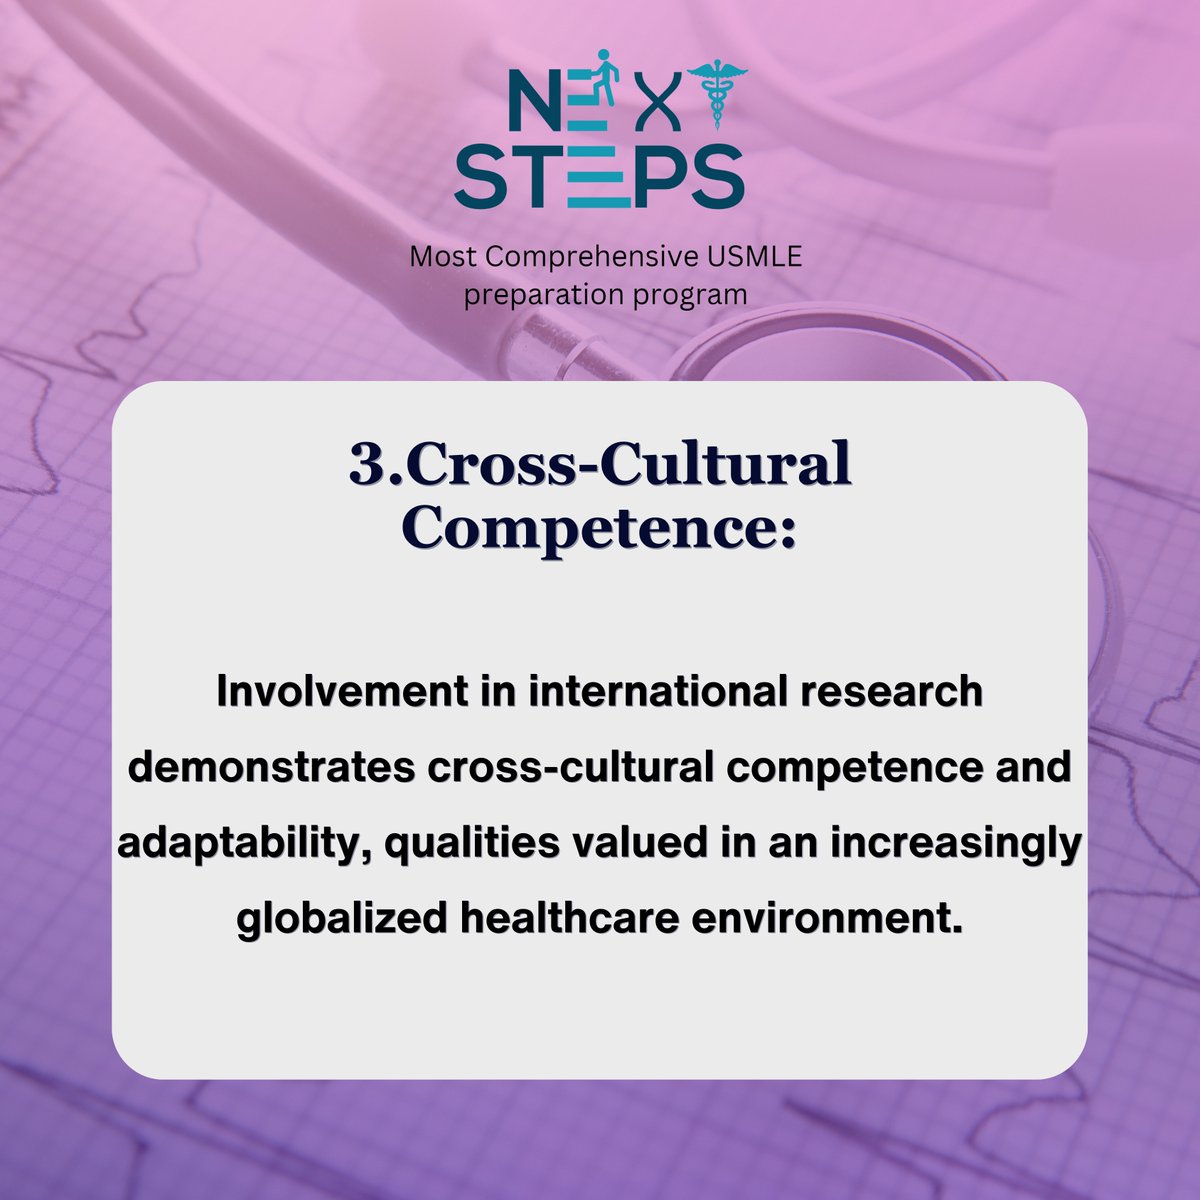 Expand your research horizons with international publications! 🌍
Register Here : nextstepscareer.com/international-…

#nextstepsusmle #usmlecv  #USMLE #usmlepreparation #usmlematch #USMLEPrep #nextsteps #nextstepsusmle #NextStepSuccess